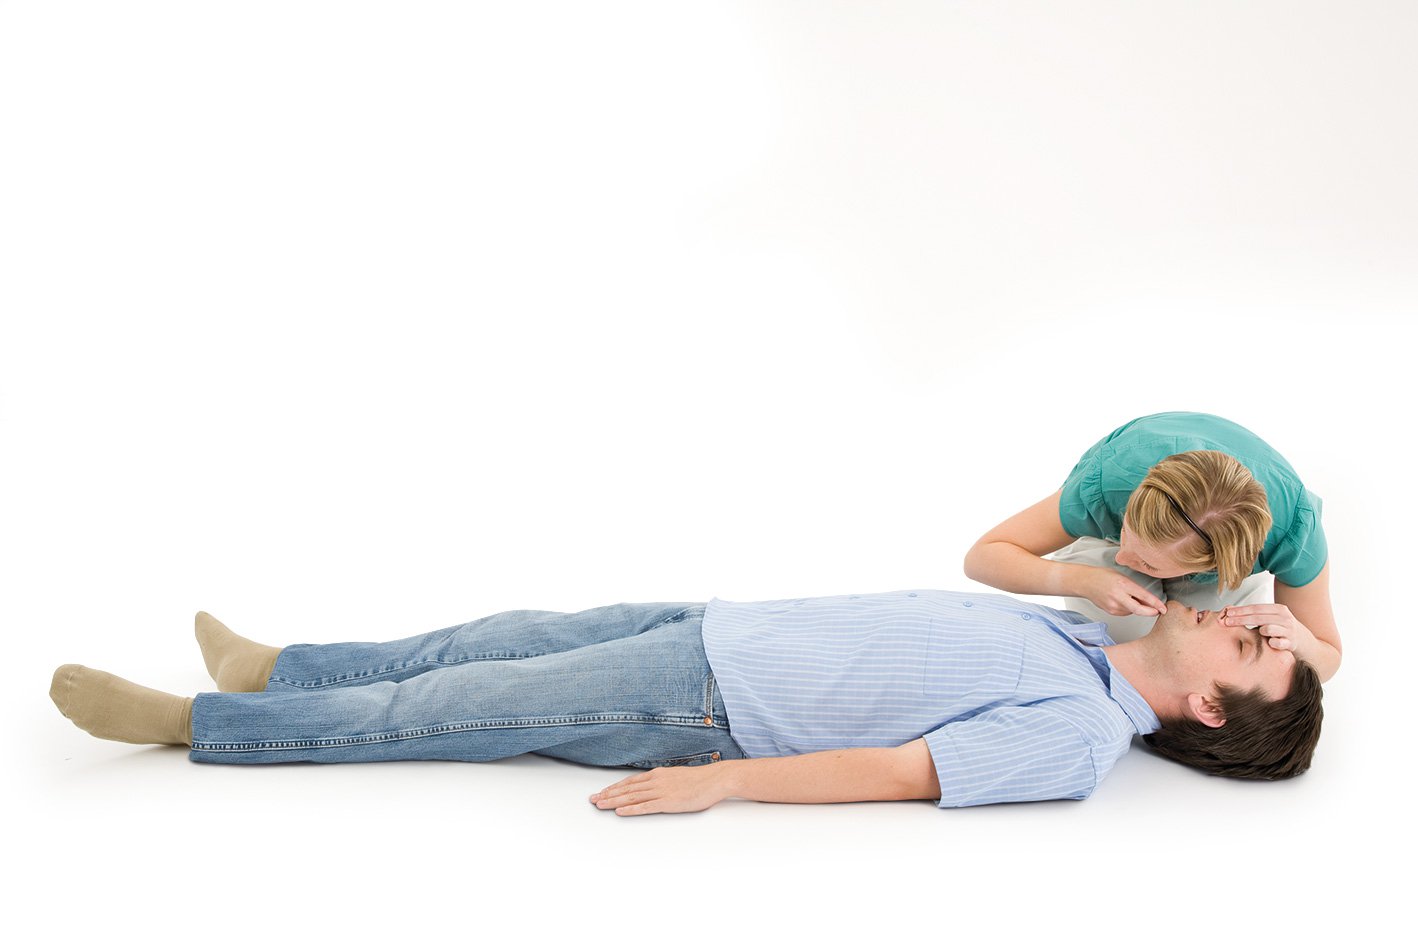 how-to-do-cpr-6